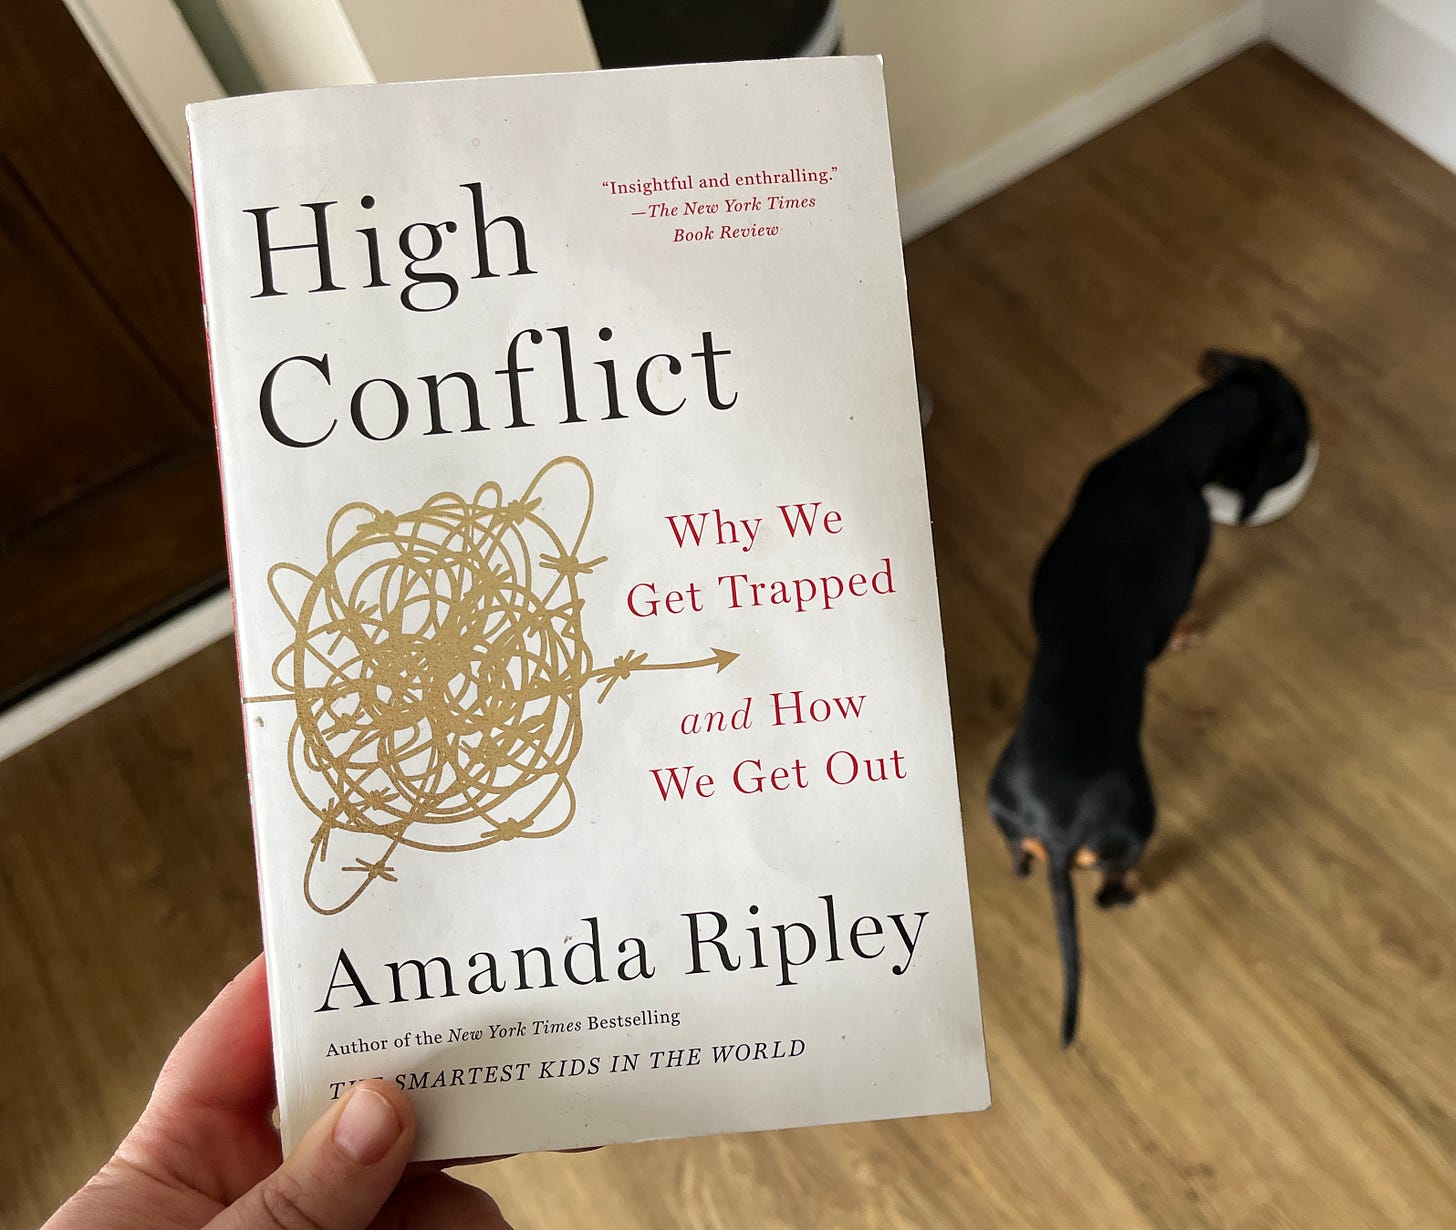 In the foreground a hand holds the book High Conflict by Amanda Ripley. In the background a black dachshund eats her breakfast.